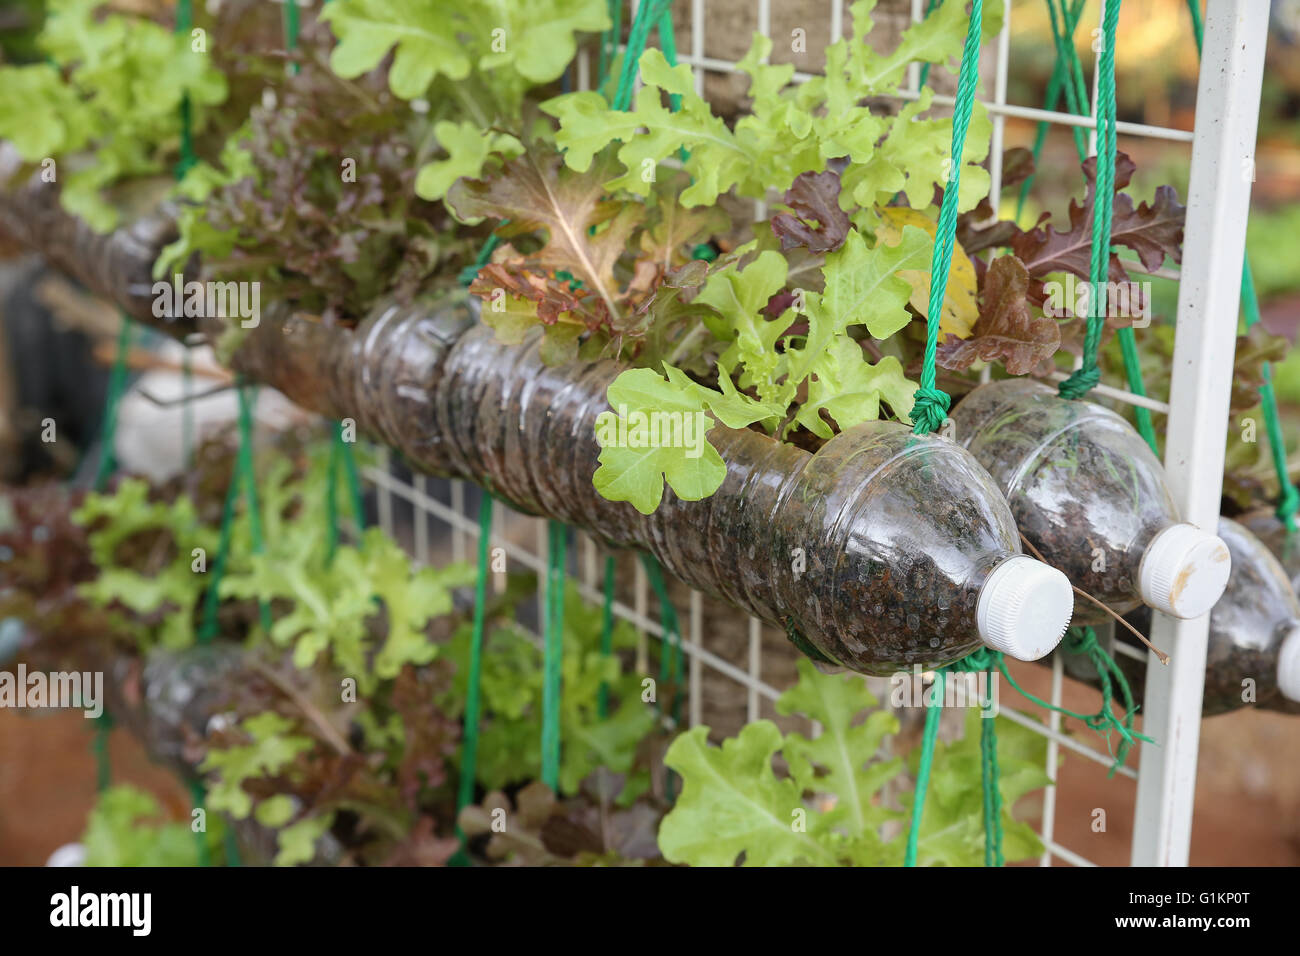 growing lettuce in used plastic bottles, reuse recycle eco concept Stock Photo